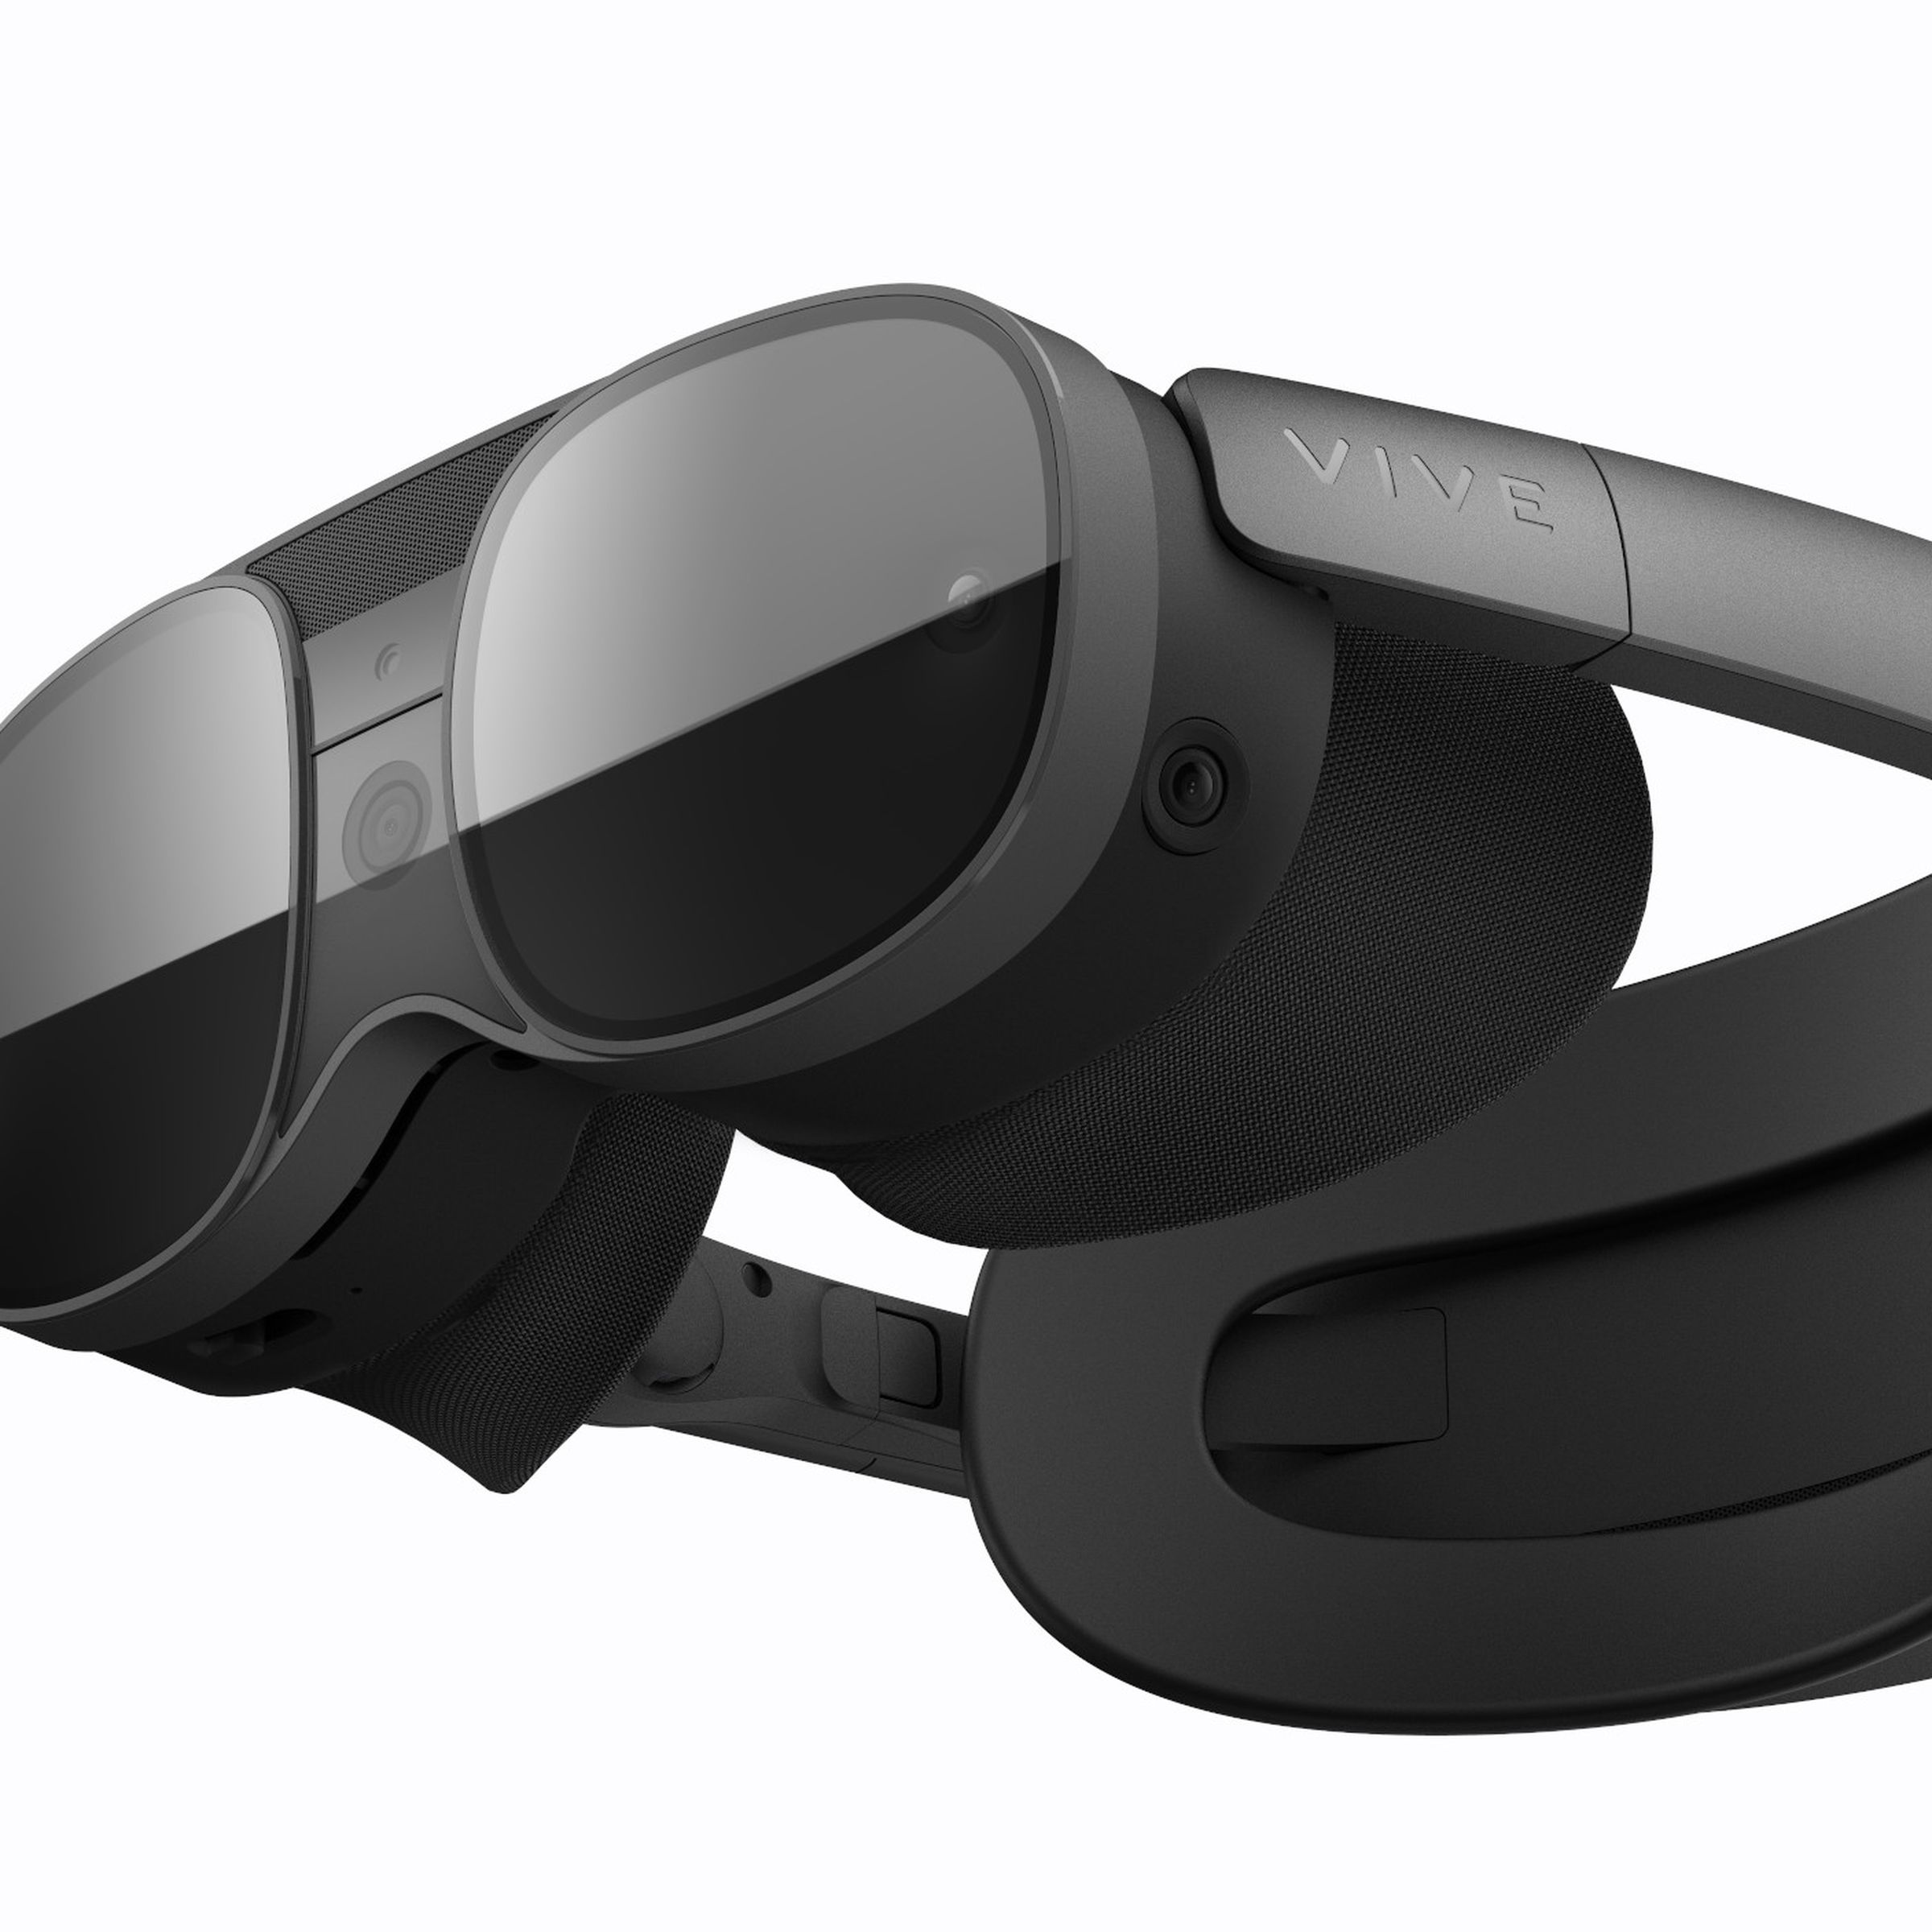 A black VR headset with a back strap and a glasses-like design.